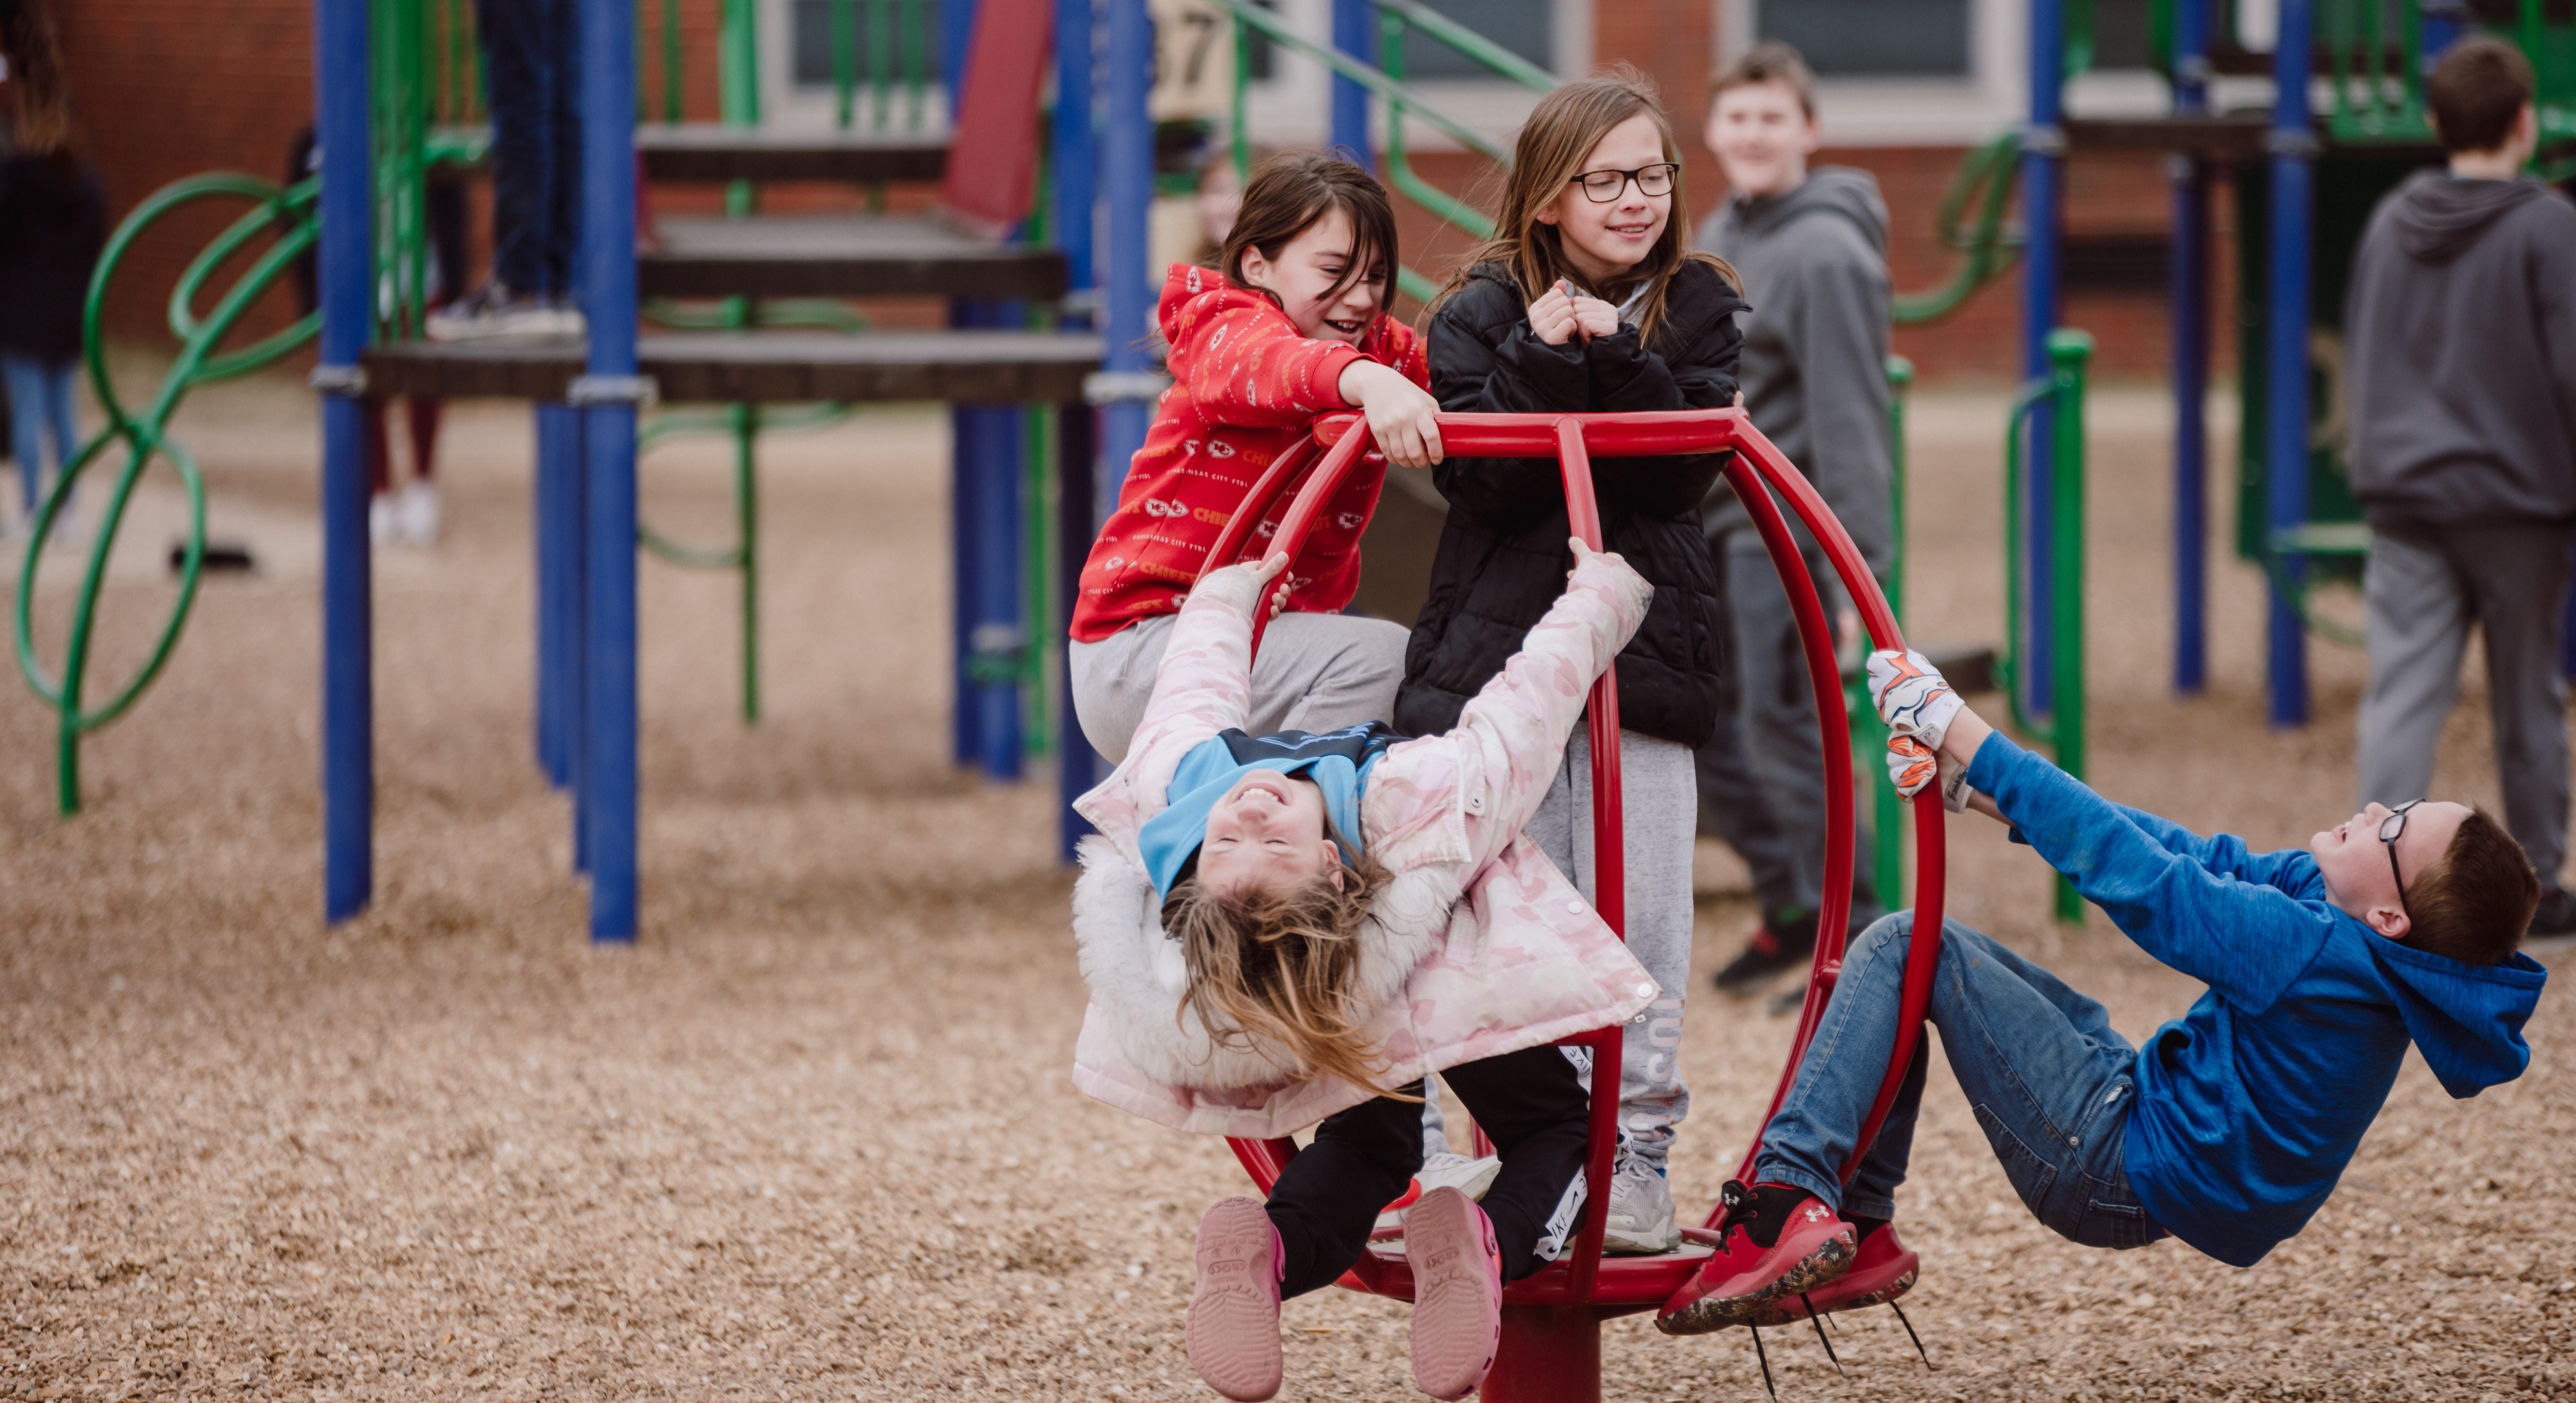 Students Playing on Playground